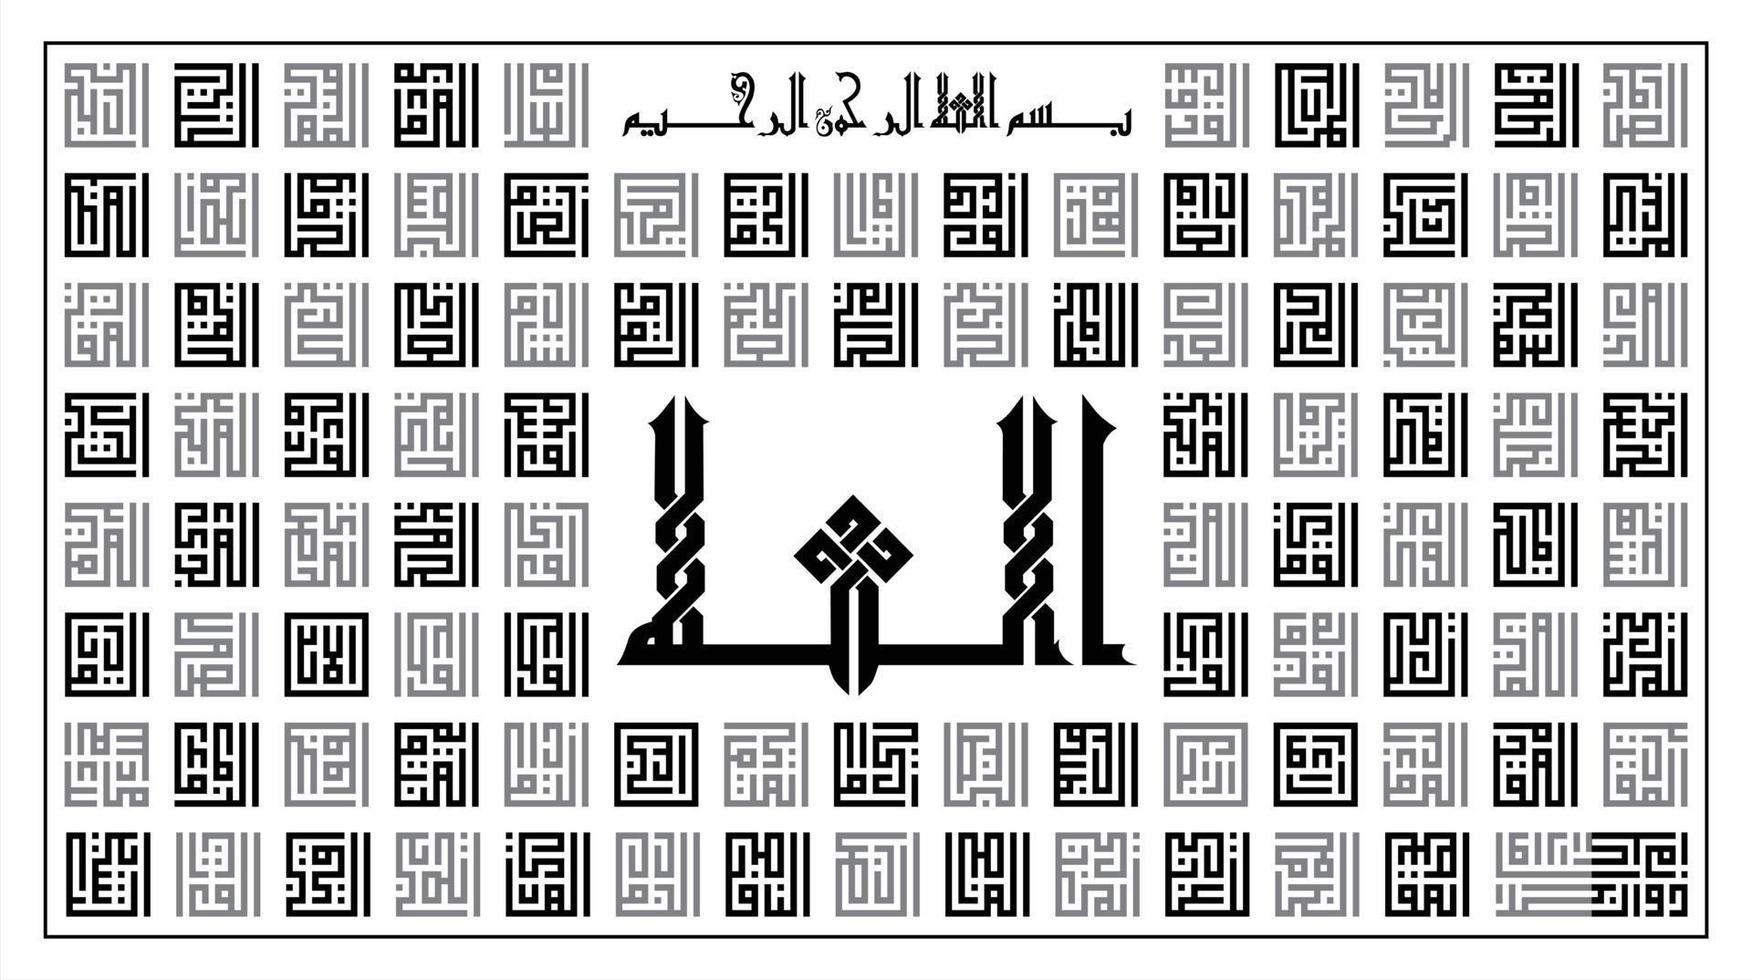 Square kufi style arabic calligraphy of Asmaul Husna '99 names af Allah'. Great for wall decoration, poster print, icon, Islamic institution logo, or islamic website. vector